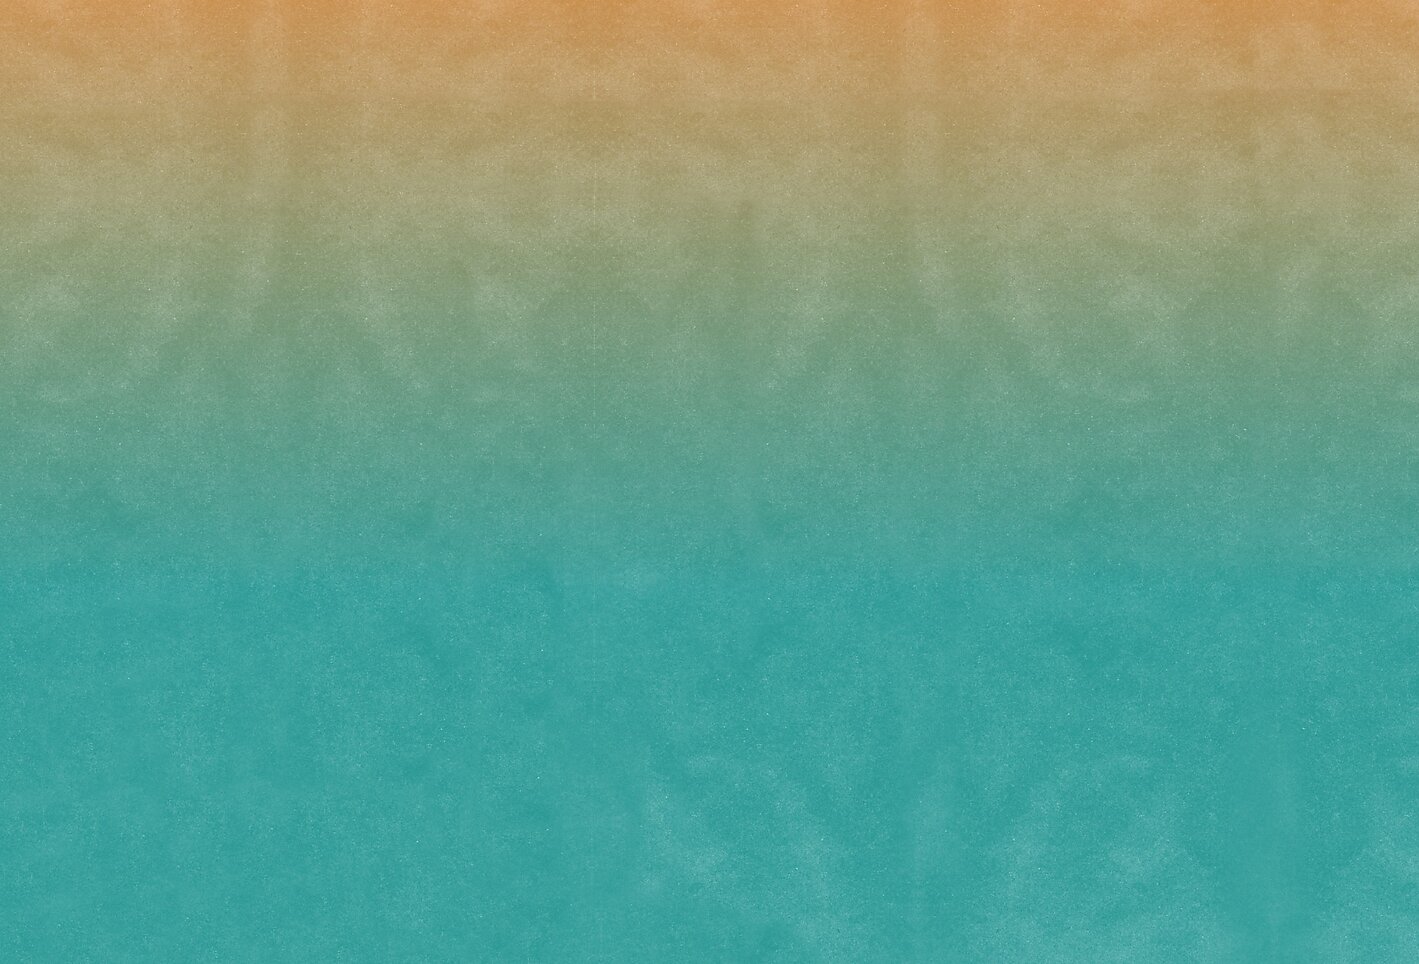 Teal and gold background